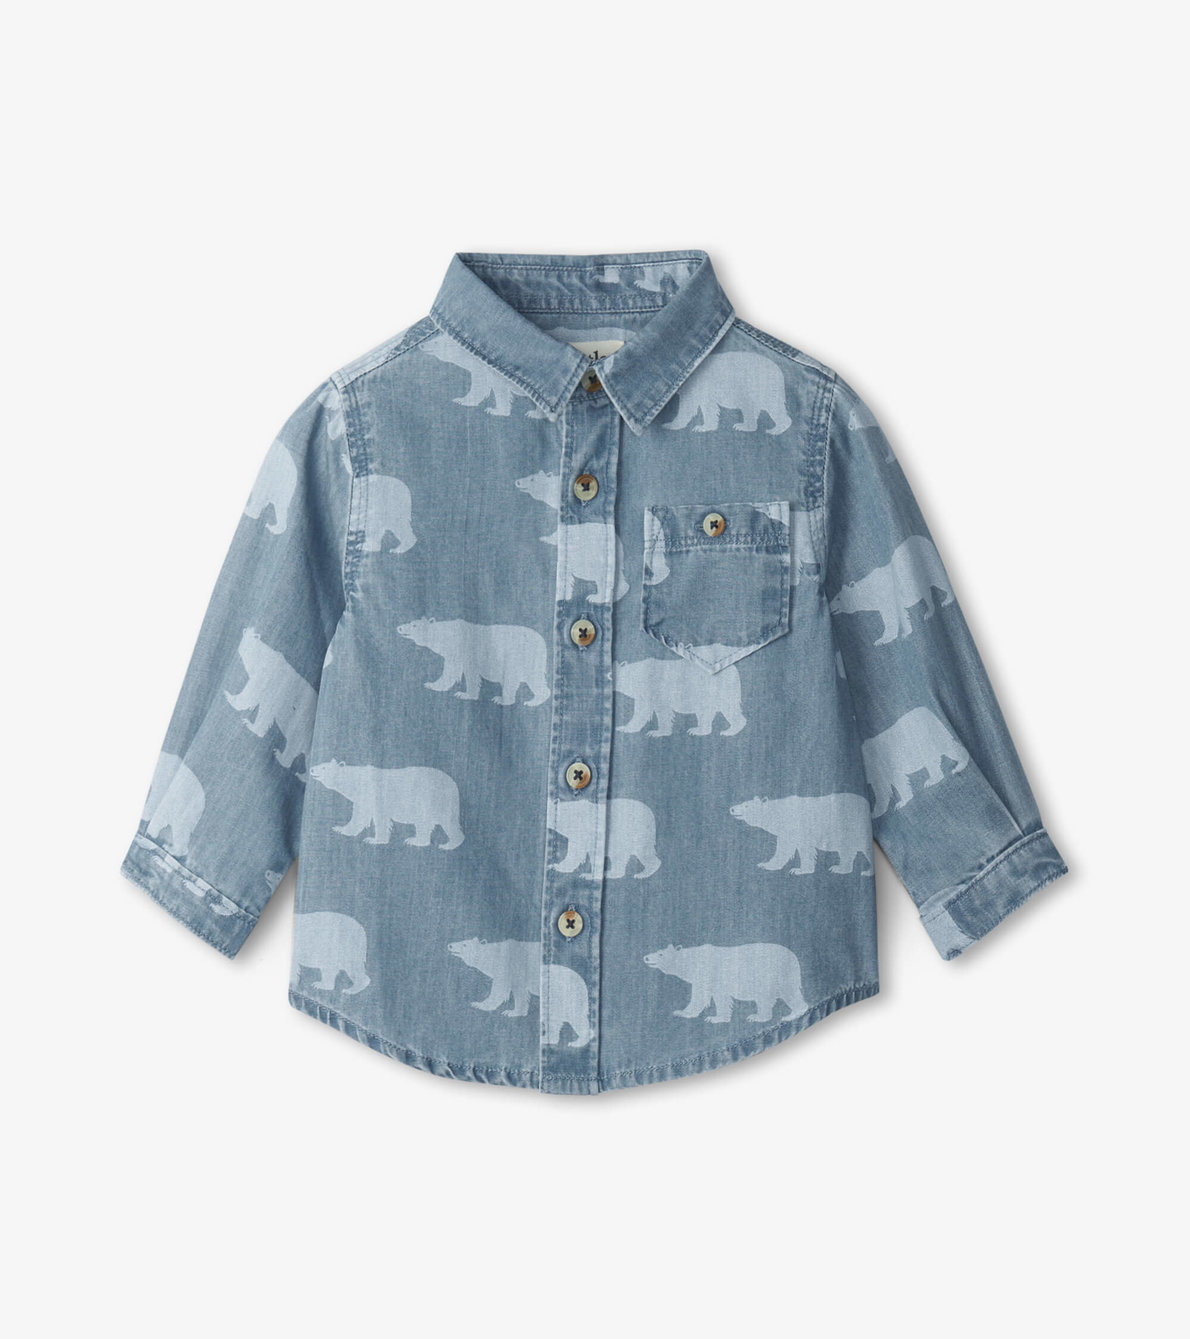 View larger image of Winter Cubs Baby Button Down Shirt